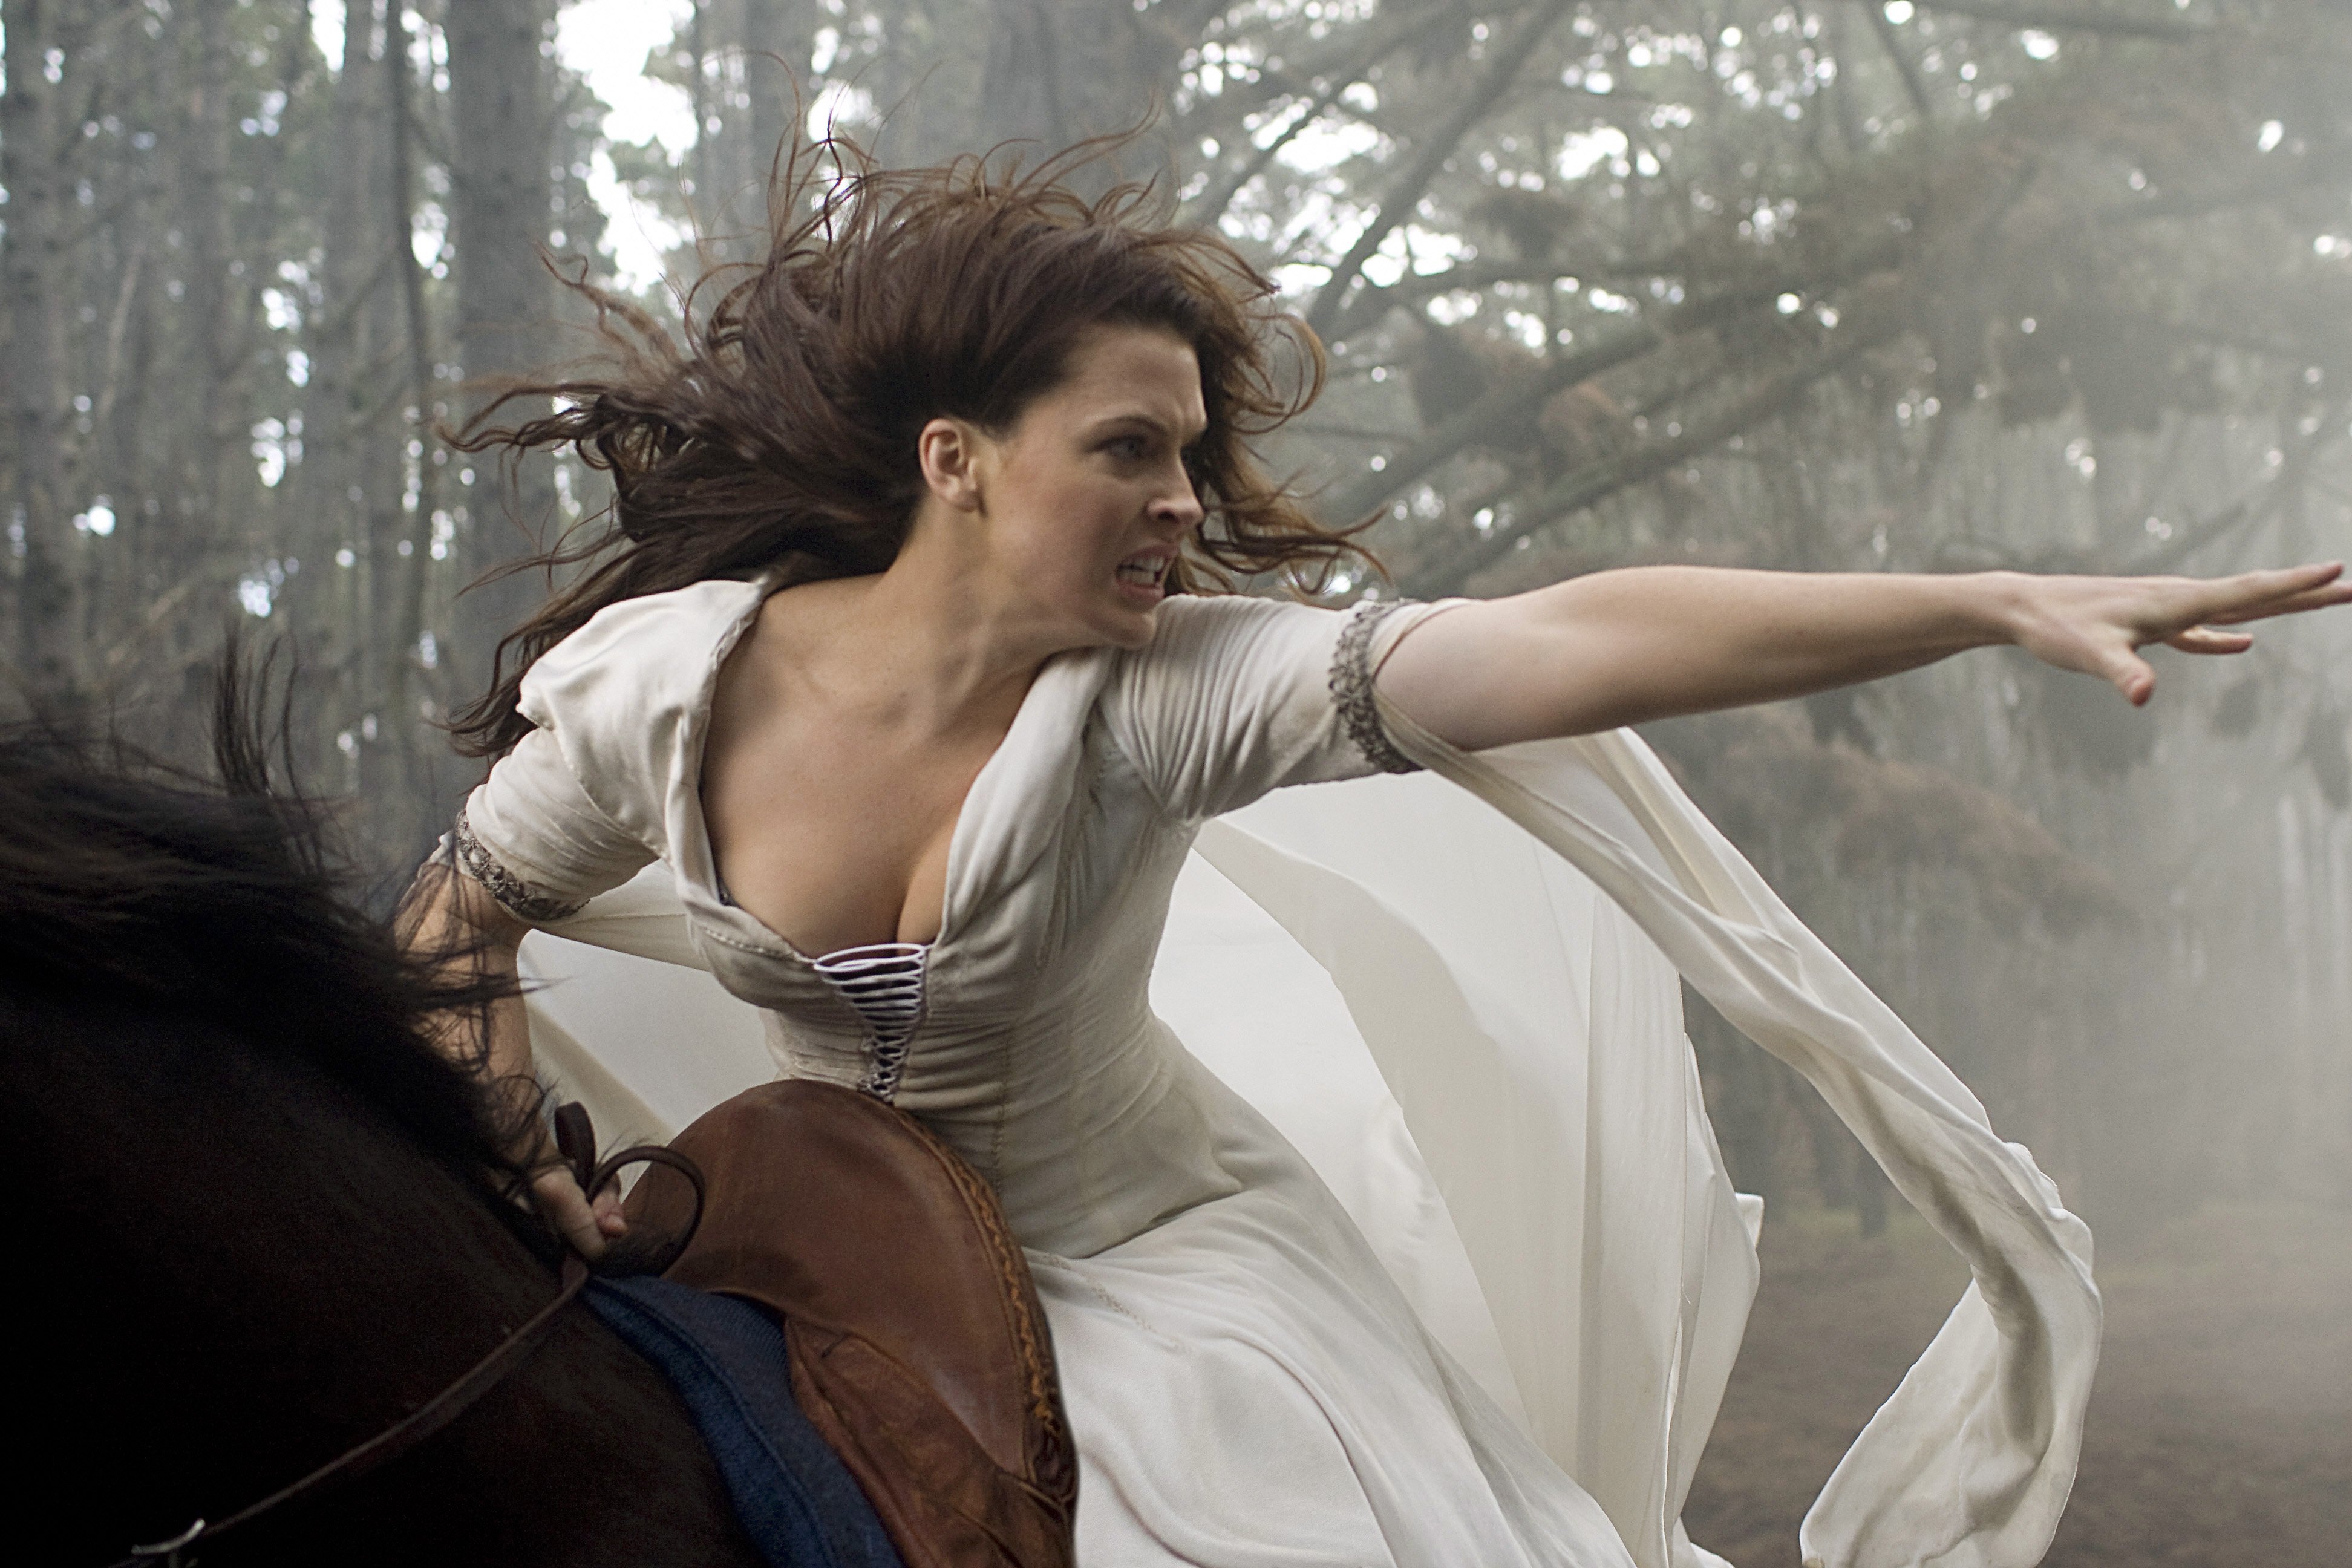 brunettes, women, forests, Bridget Regan, Legend Of The Seeker, cleavage, outdoors, horses, angry, action, reaching out, riding, horseback riding, girls with horses - desktop wallpaper